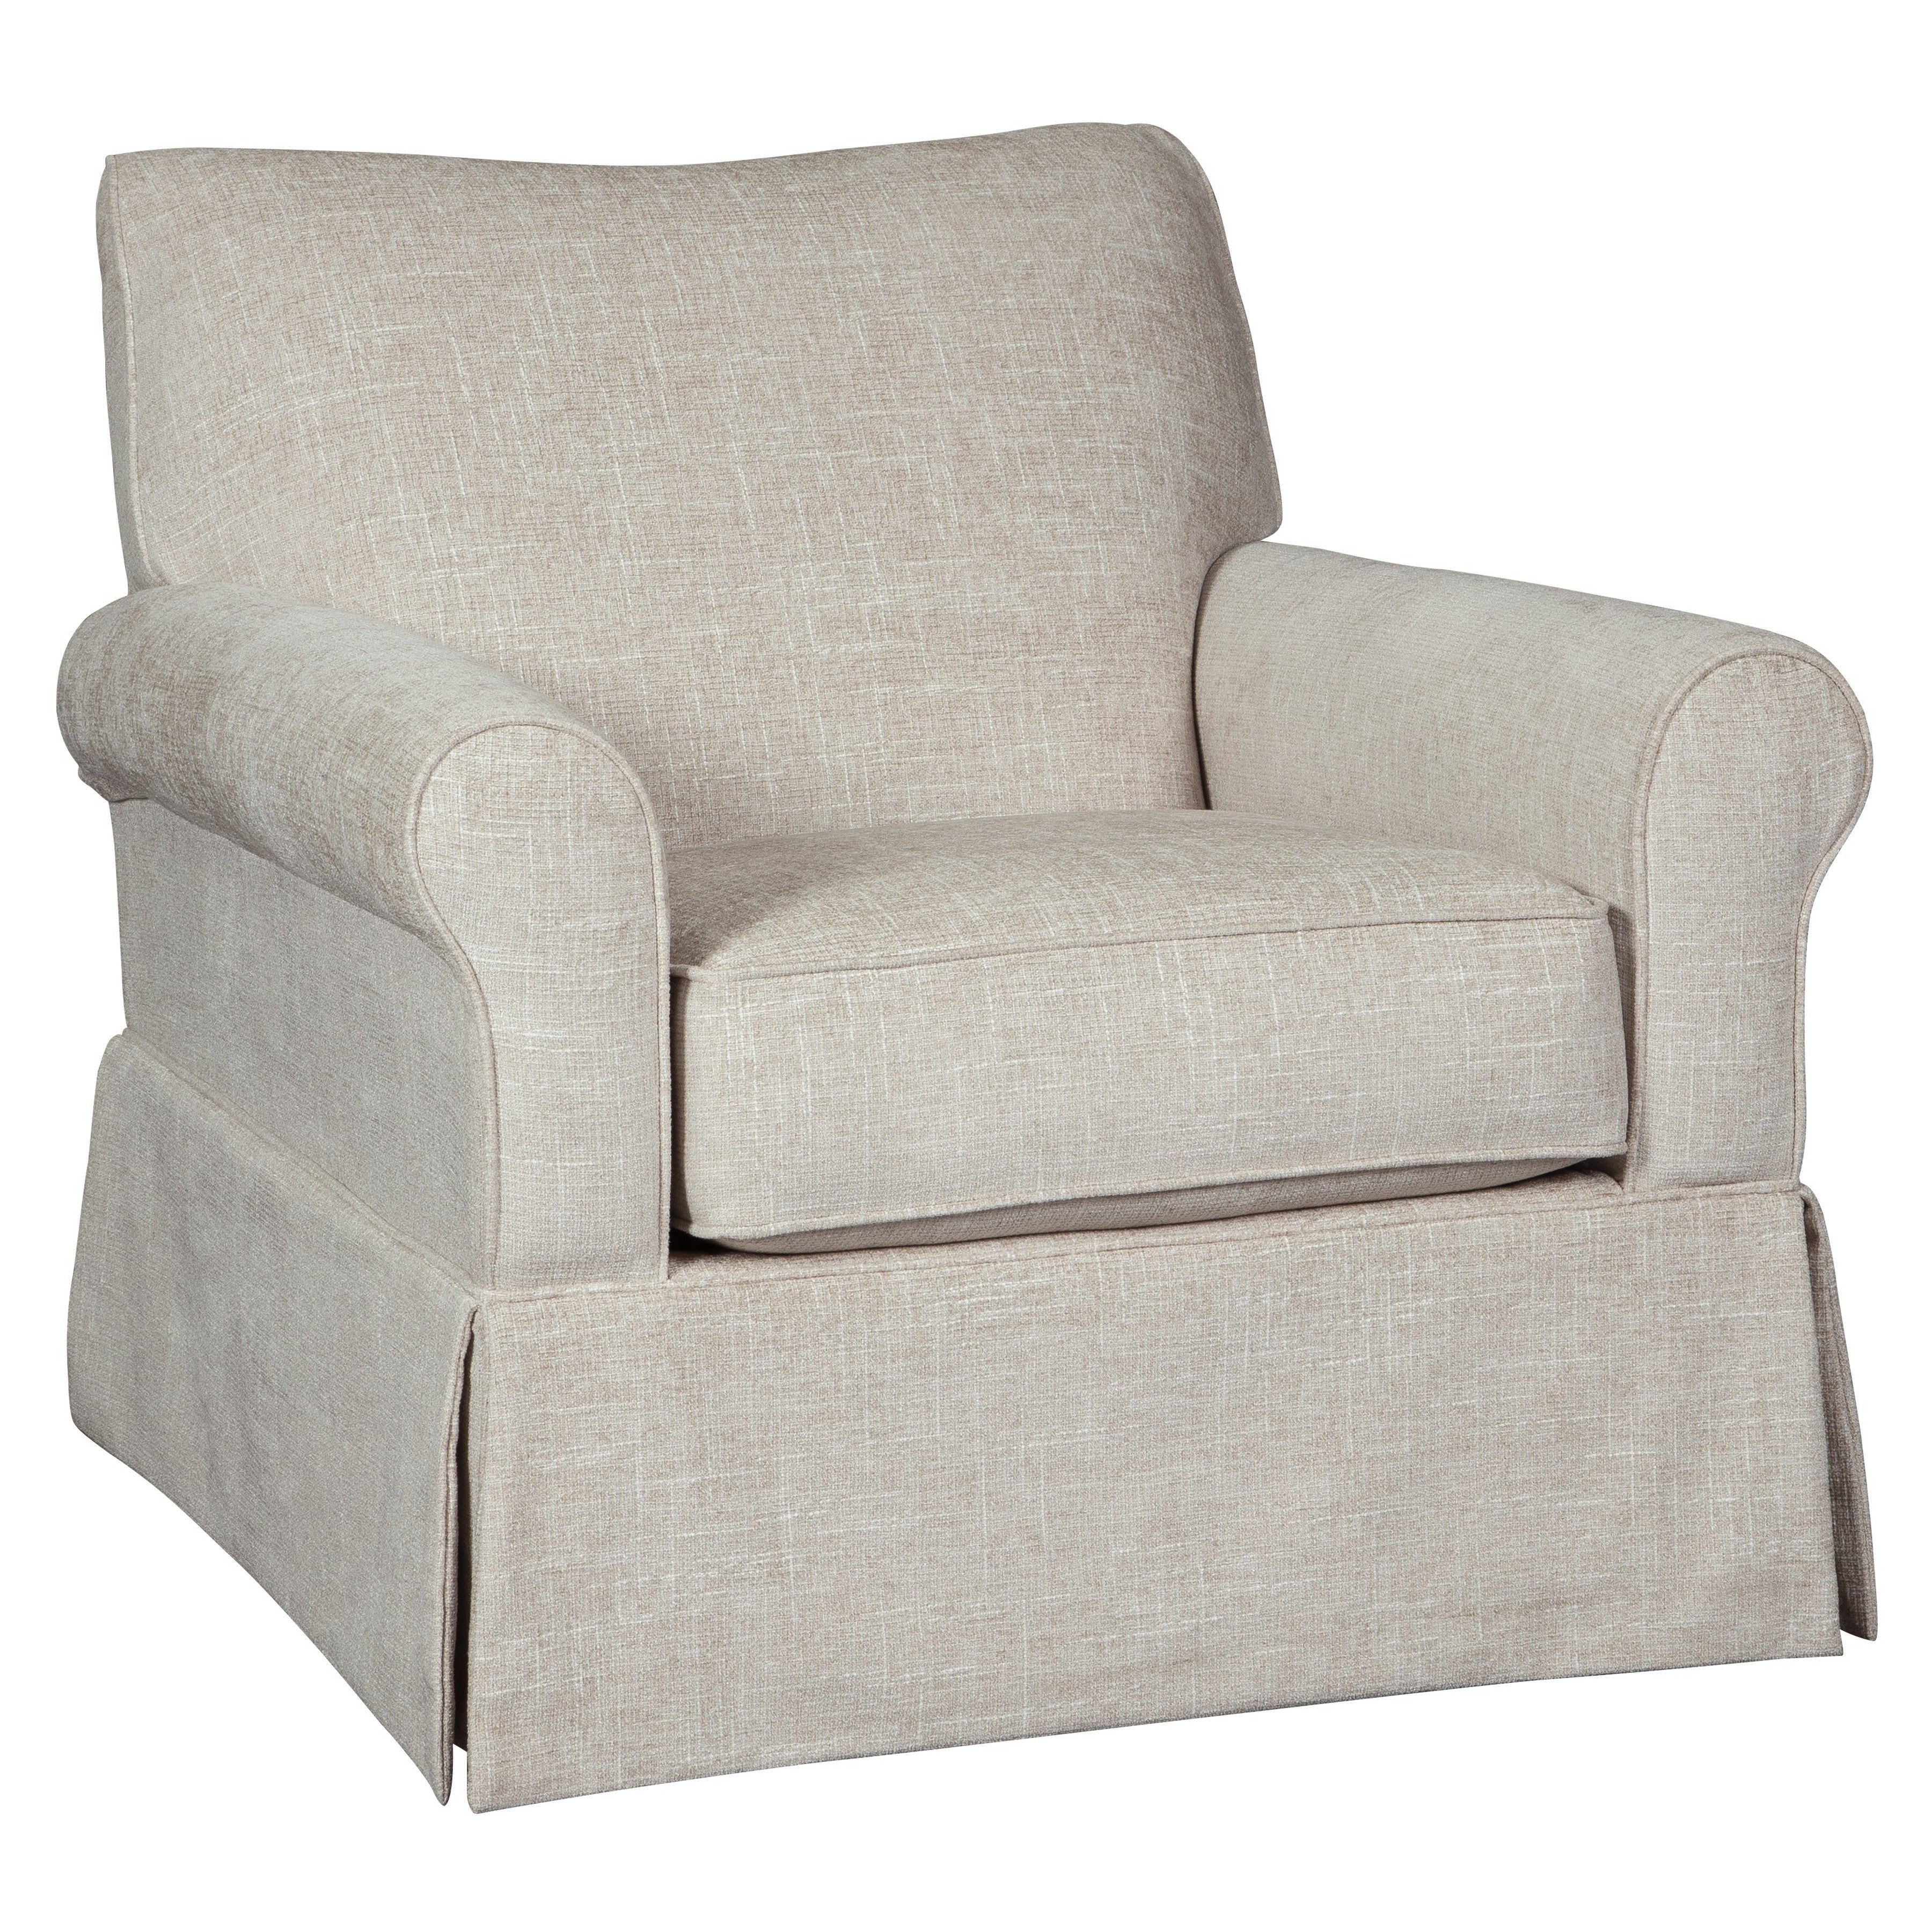 Searcy Accent Chair Ash-A3000006